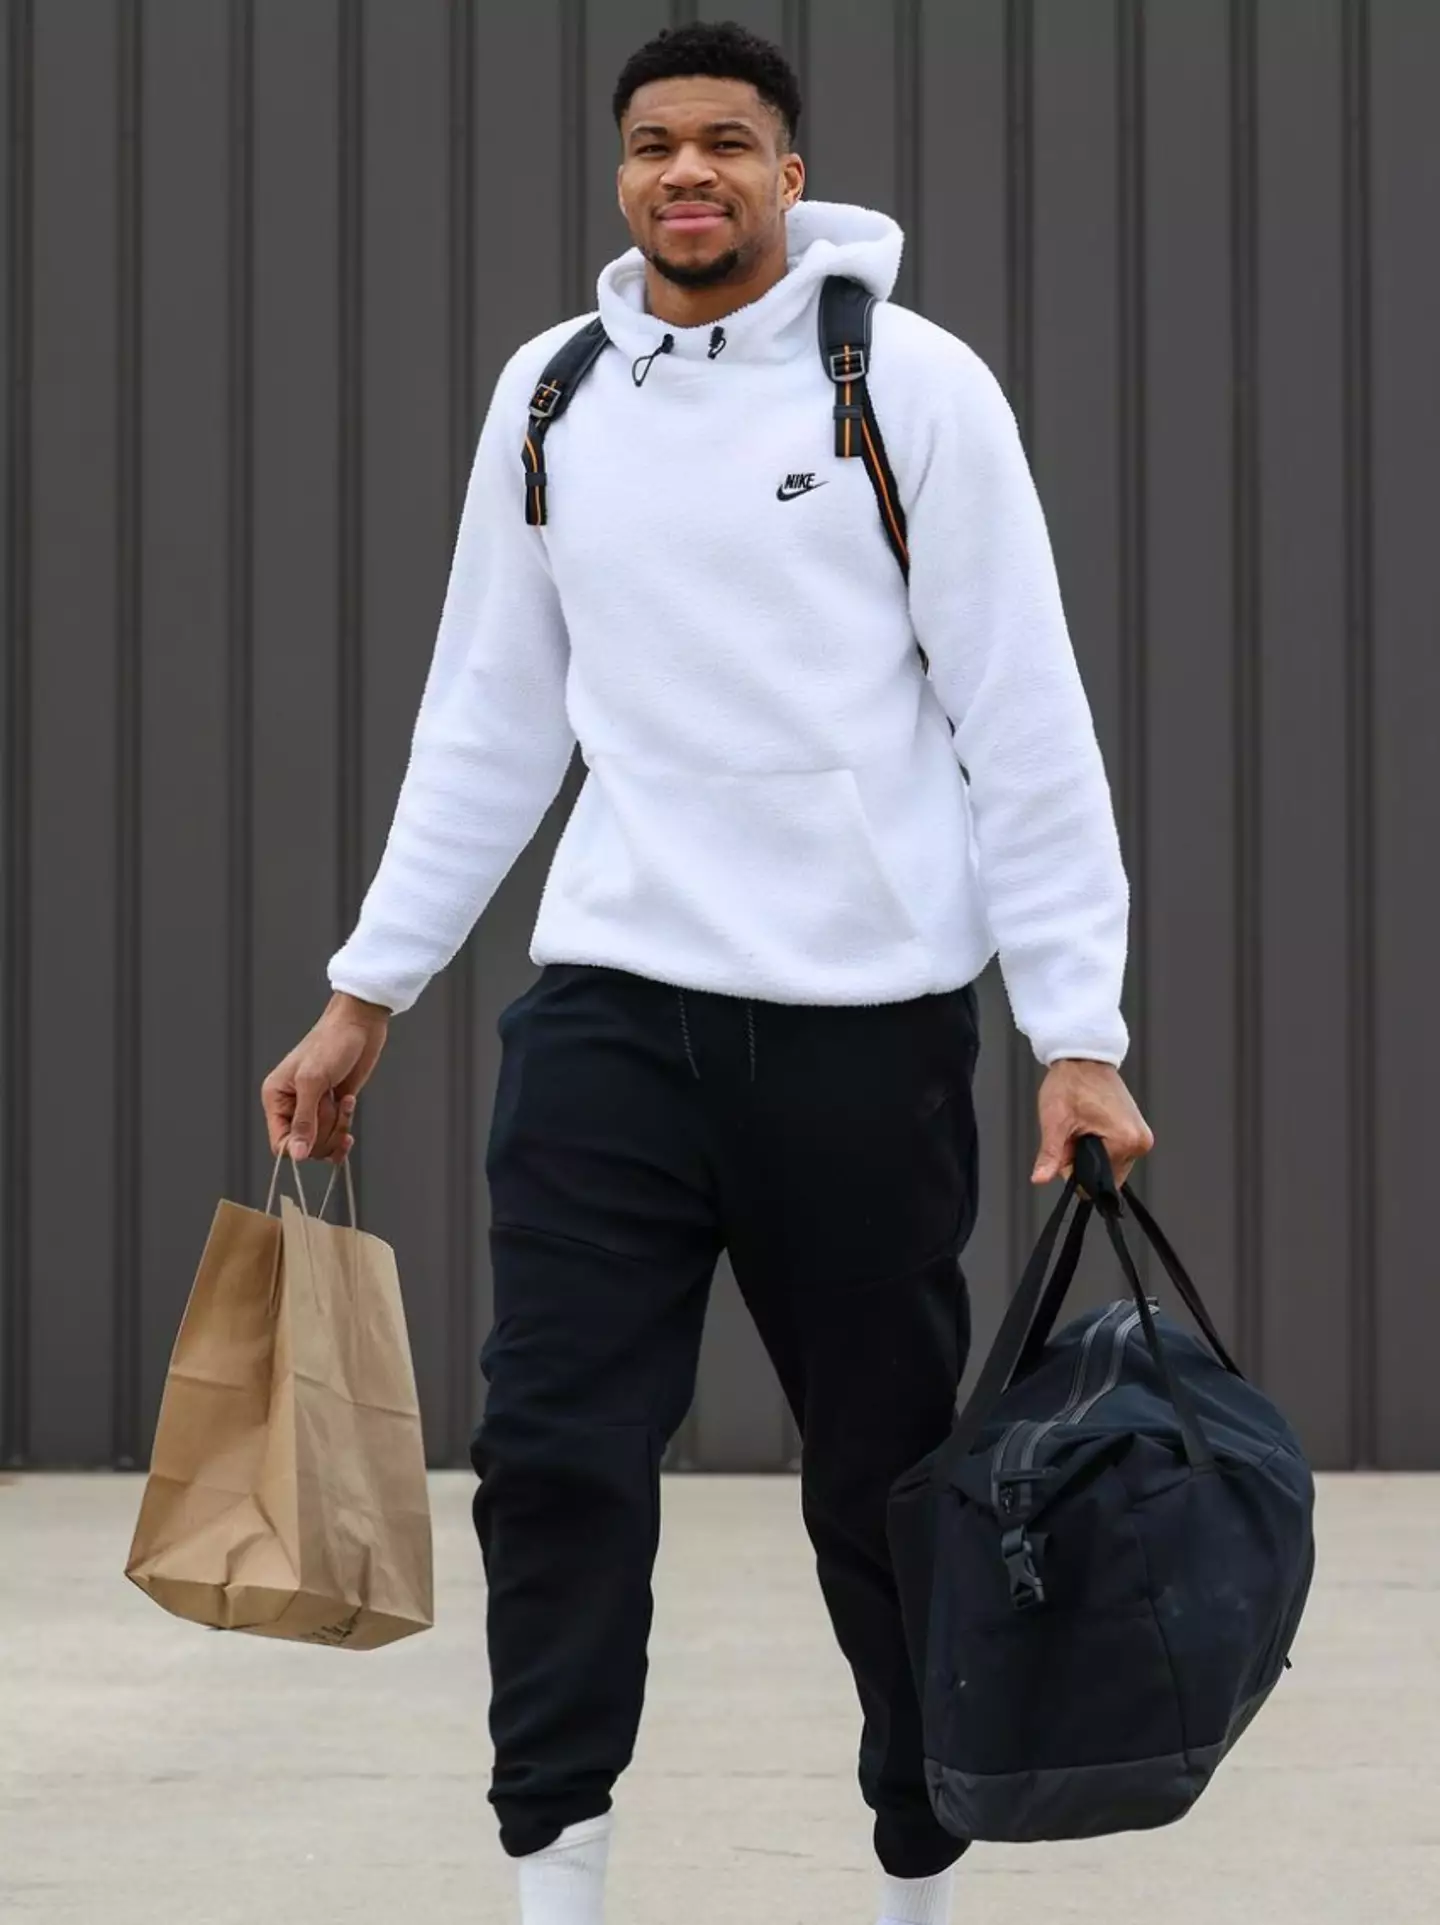 Giannis at 18 would have been carrying cash in those bags.